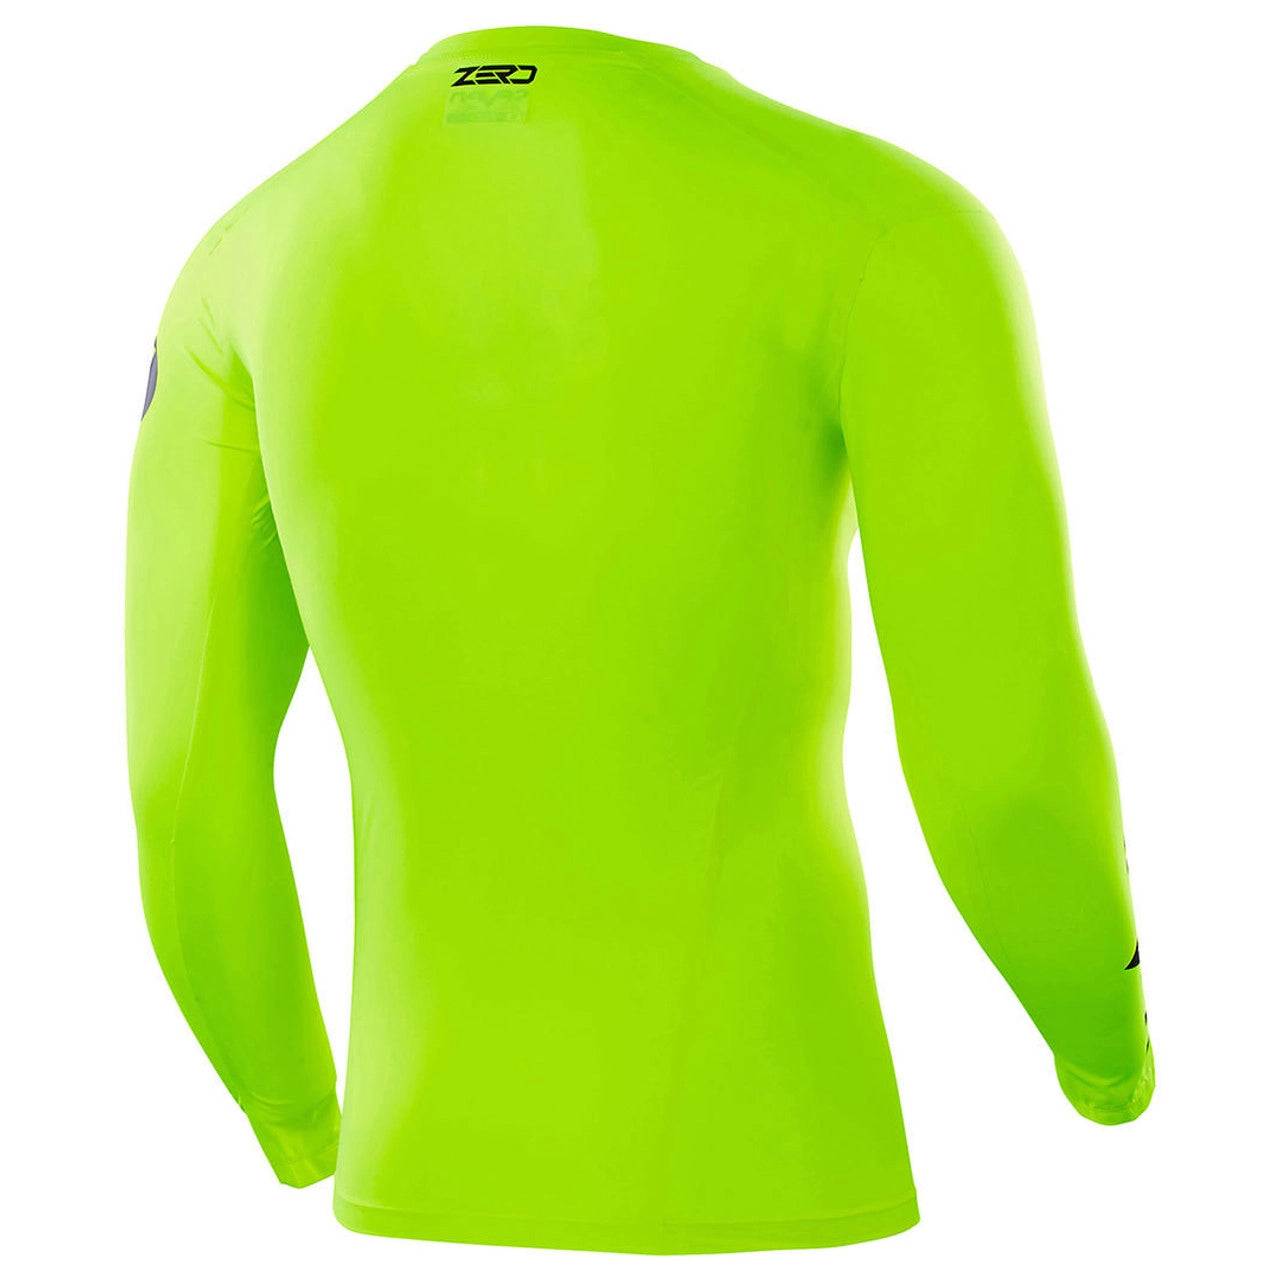 Seven MX Zero YOUTH Compression Jersey Flo Yellow